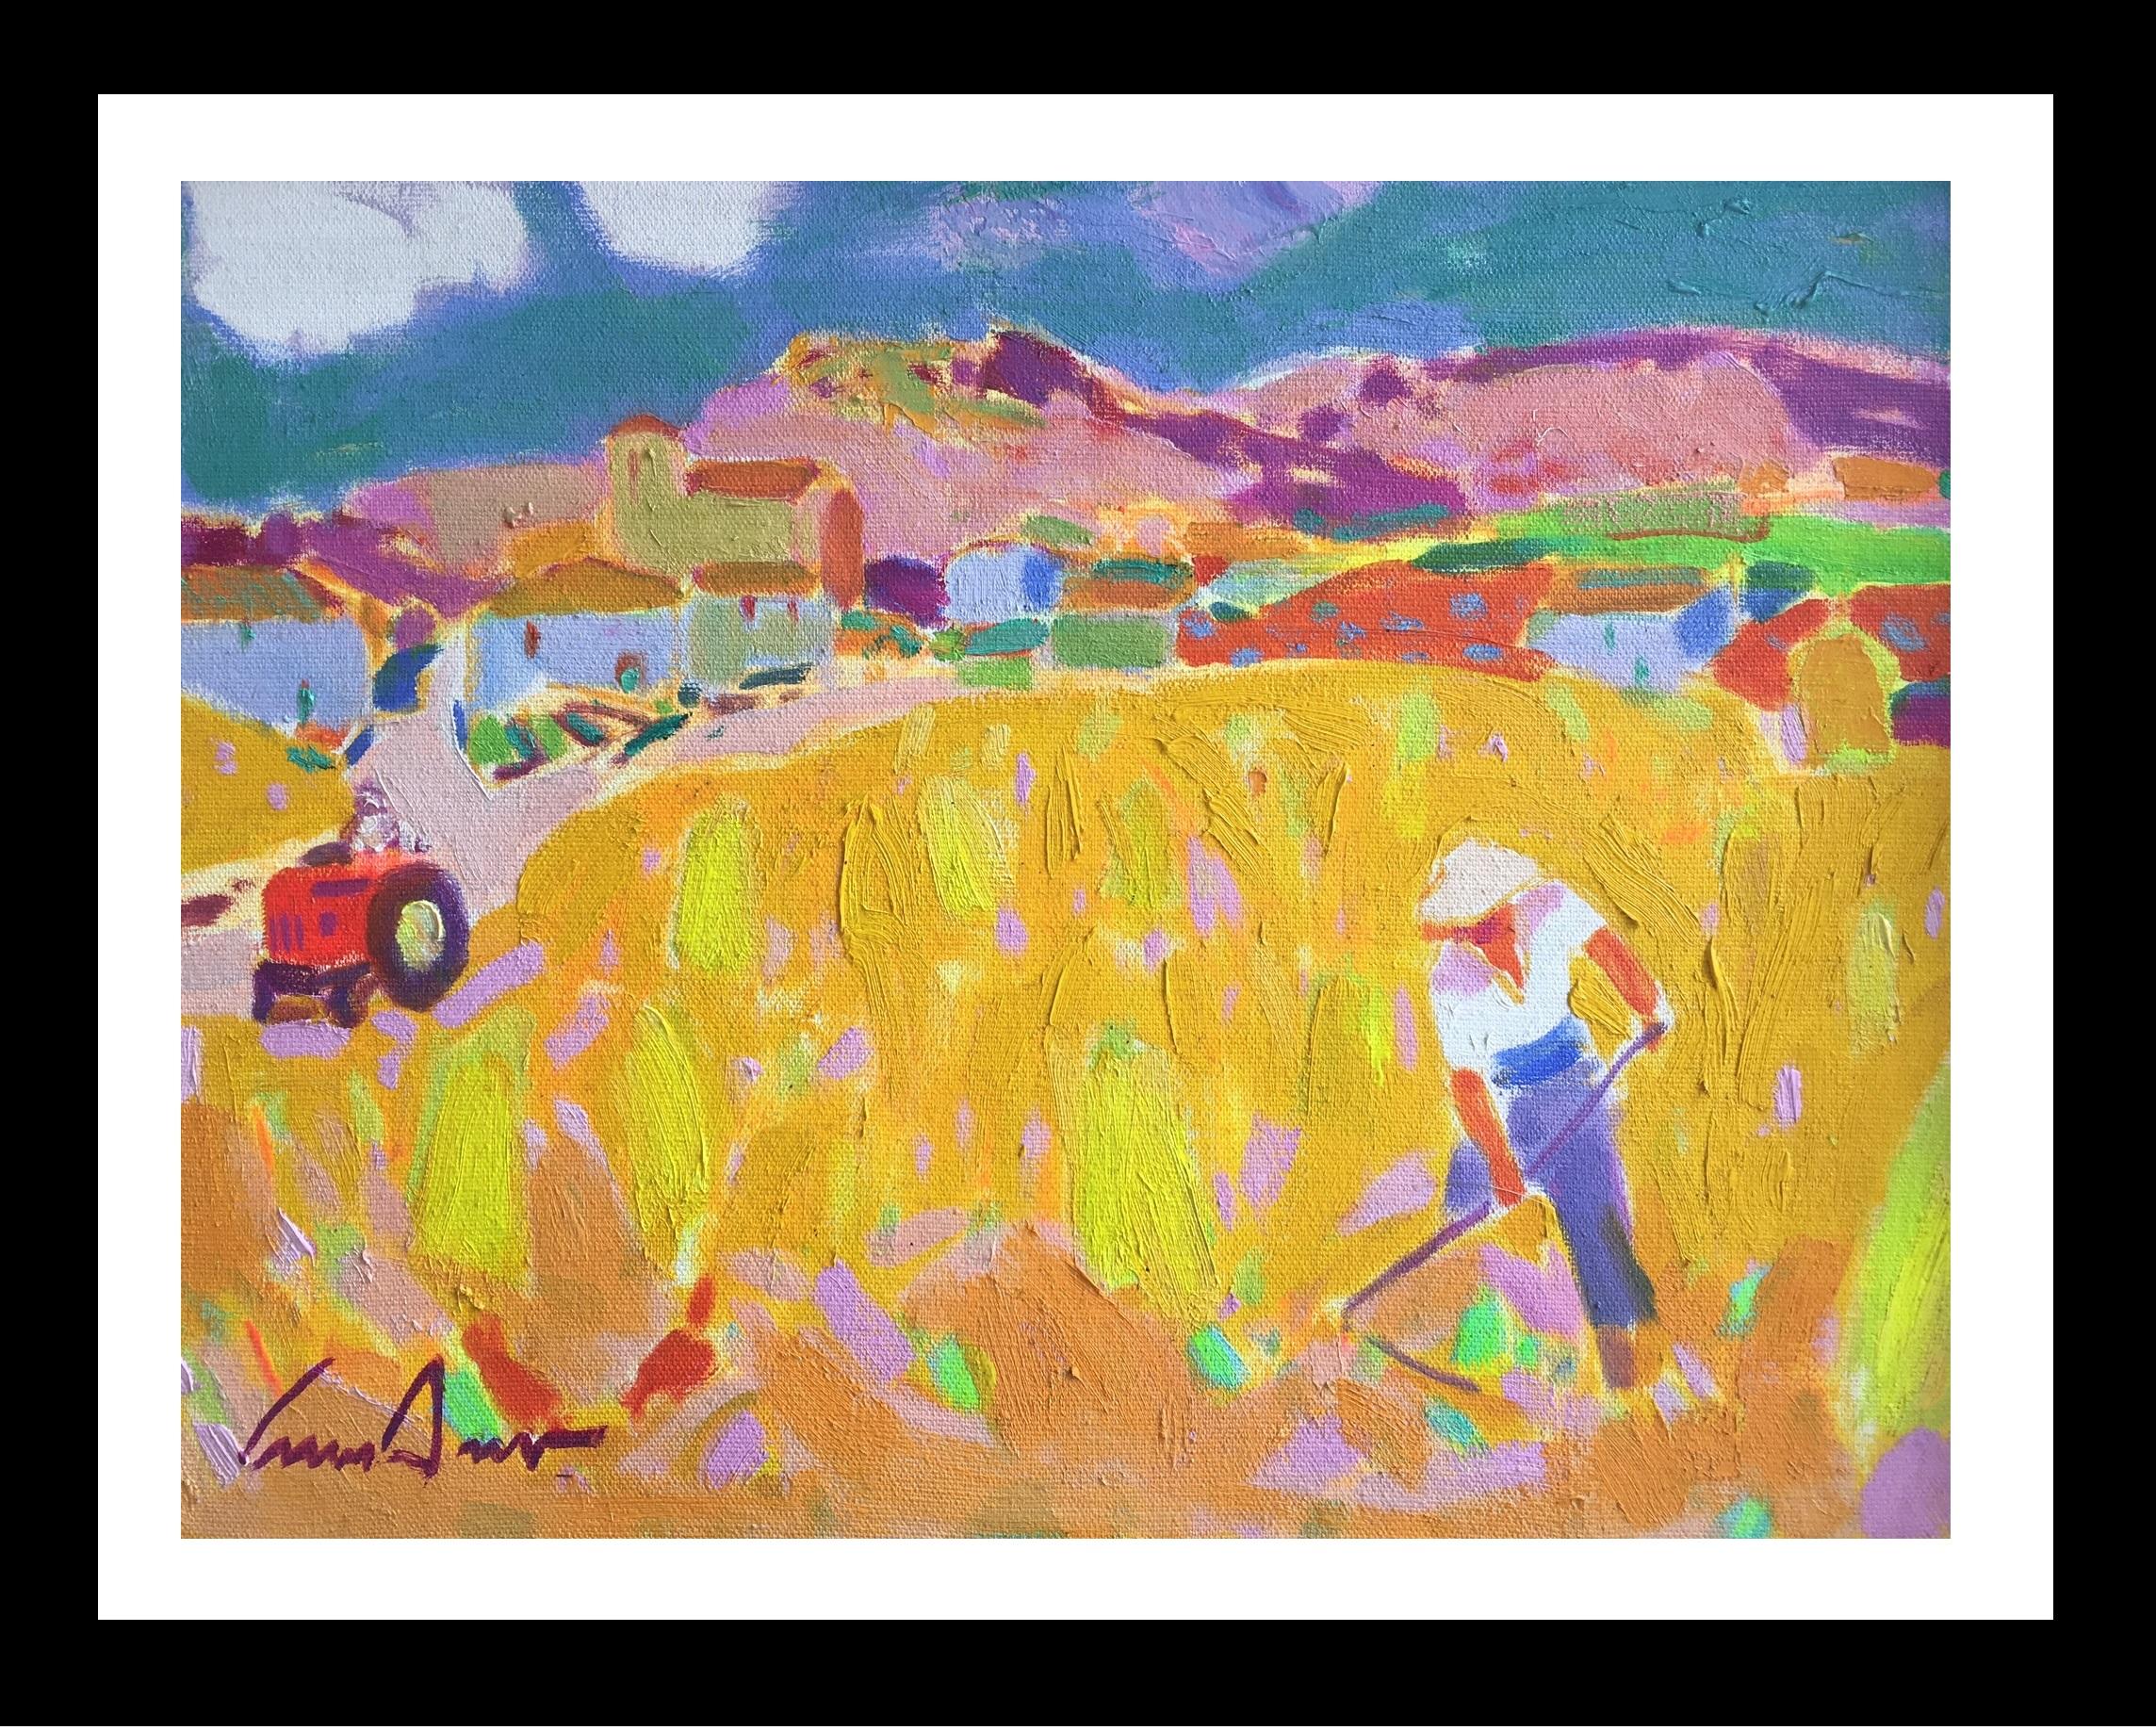  Luis Amer    WHEAT FIELD  original expressionist acrylic canvas painting